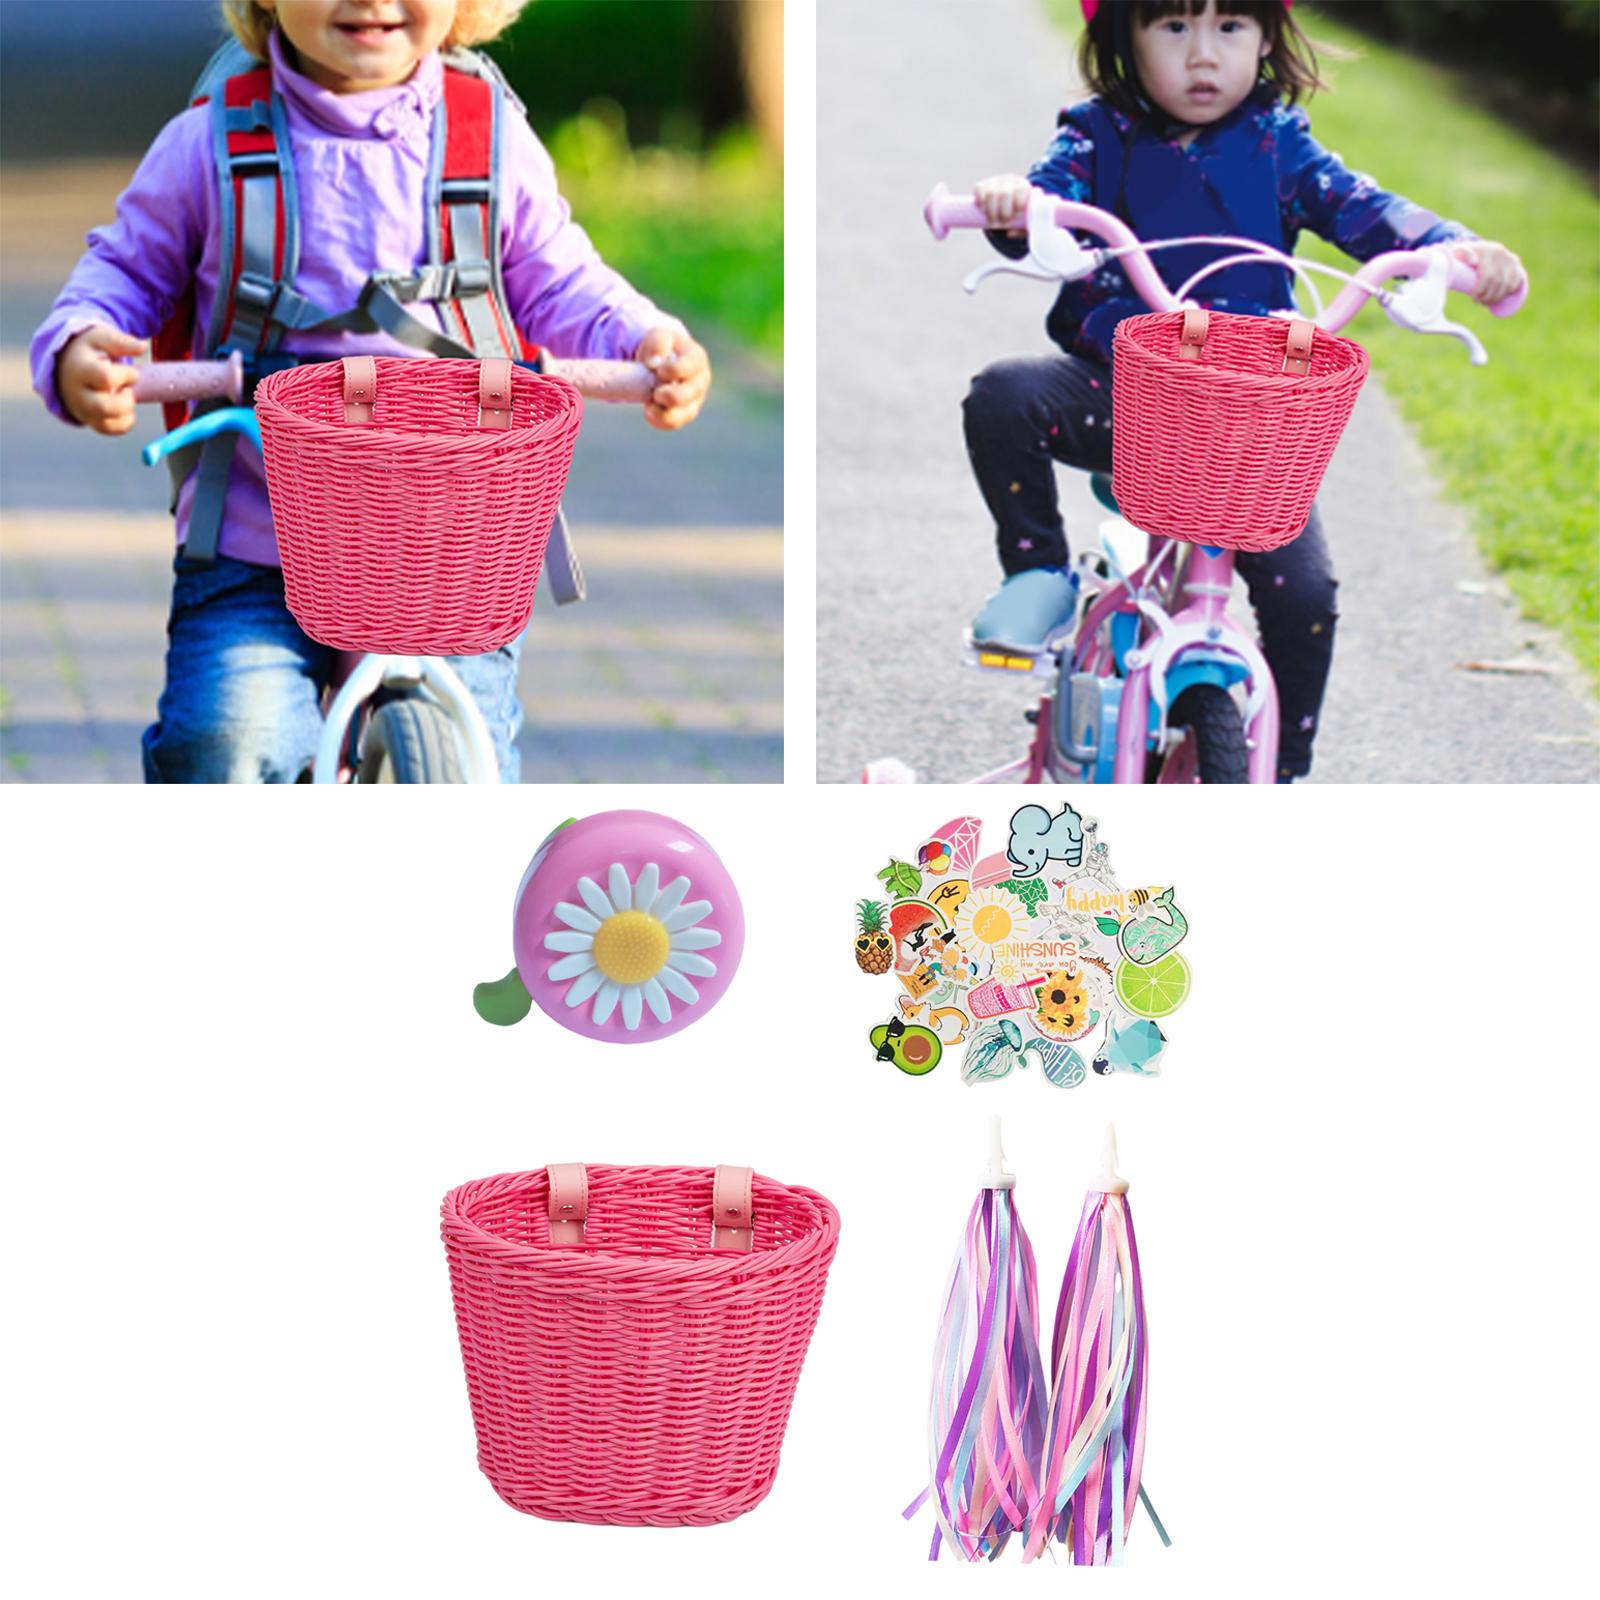 Bike Basket with Colored Tassel Cycling Accs Handmade Wicker for Adult Pink